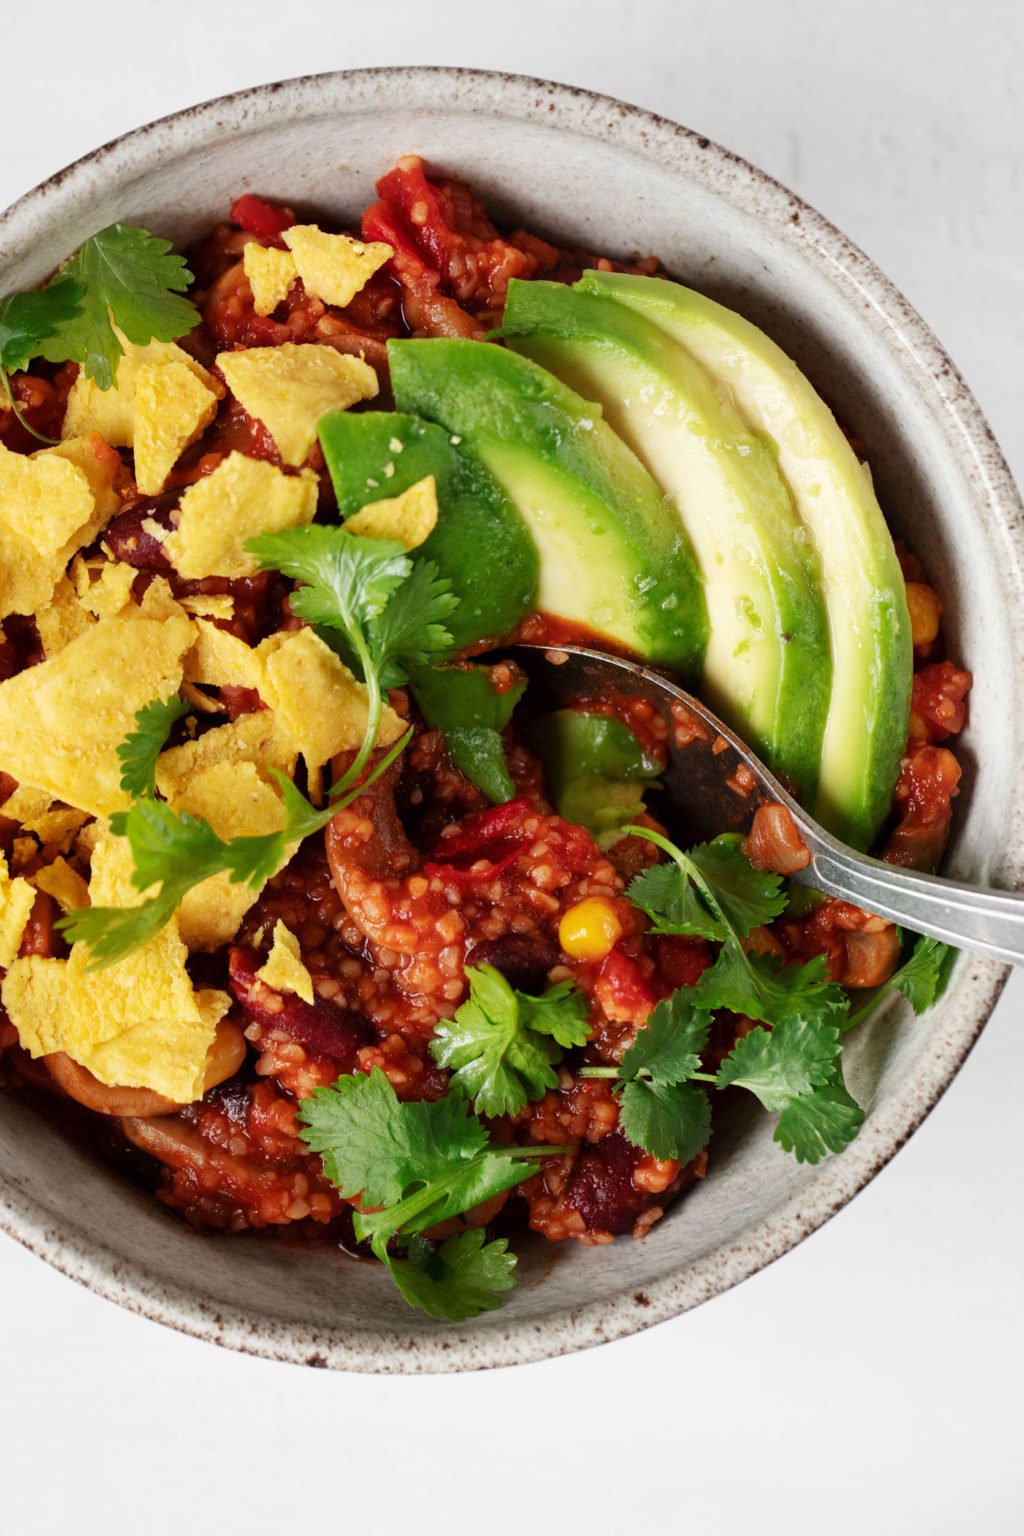 A close-up, overhead image of a bowl of hearty vegan mushroom bulgur bean chili. The red chili is topped with avocado slices and crumbled corn chips.